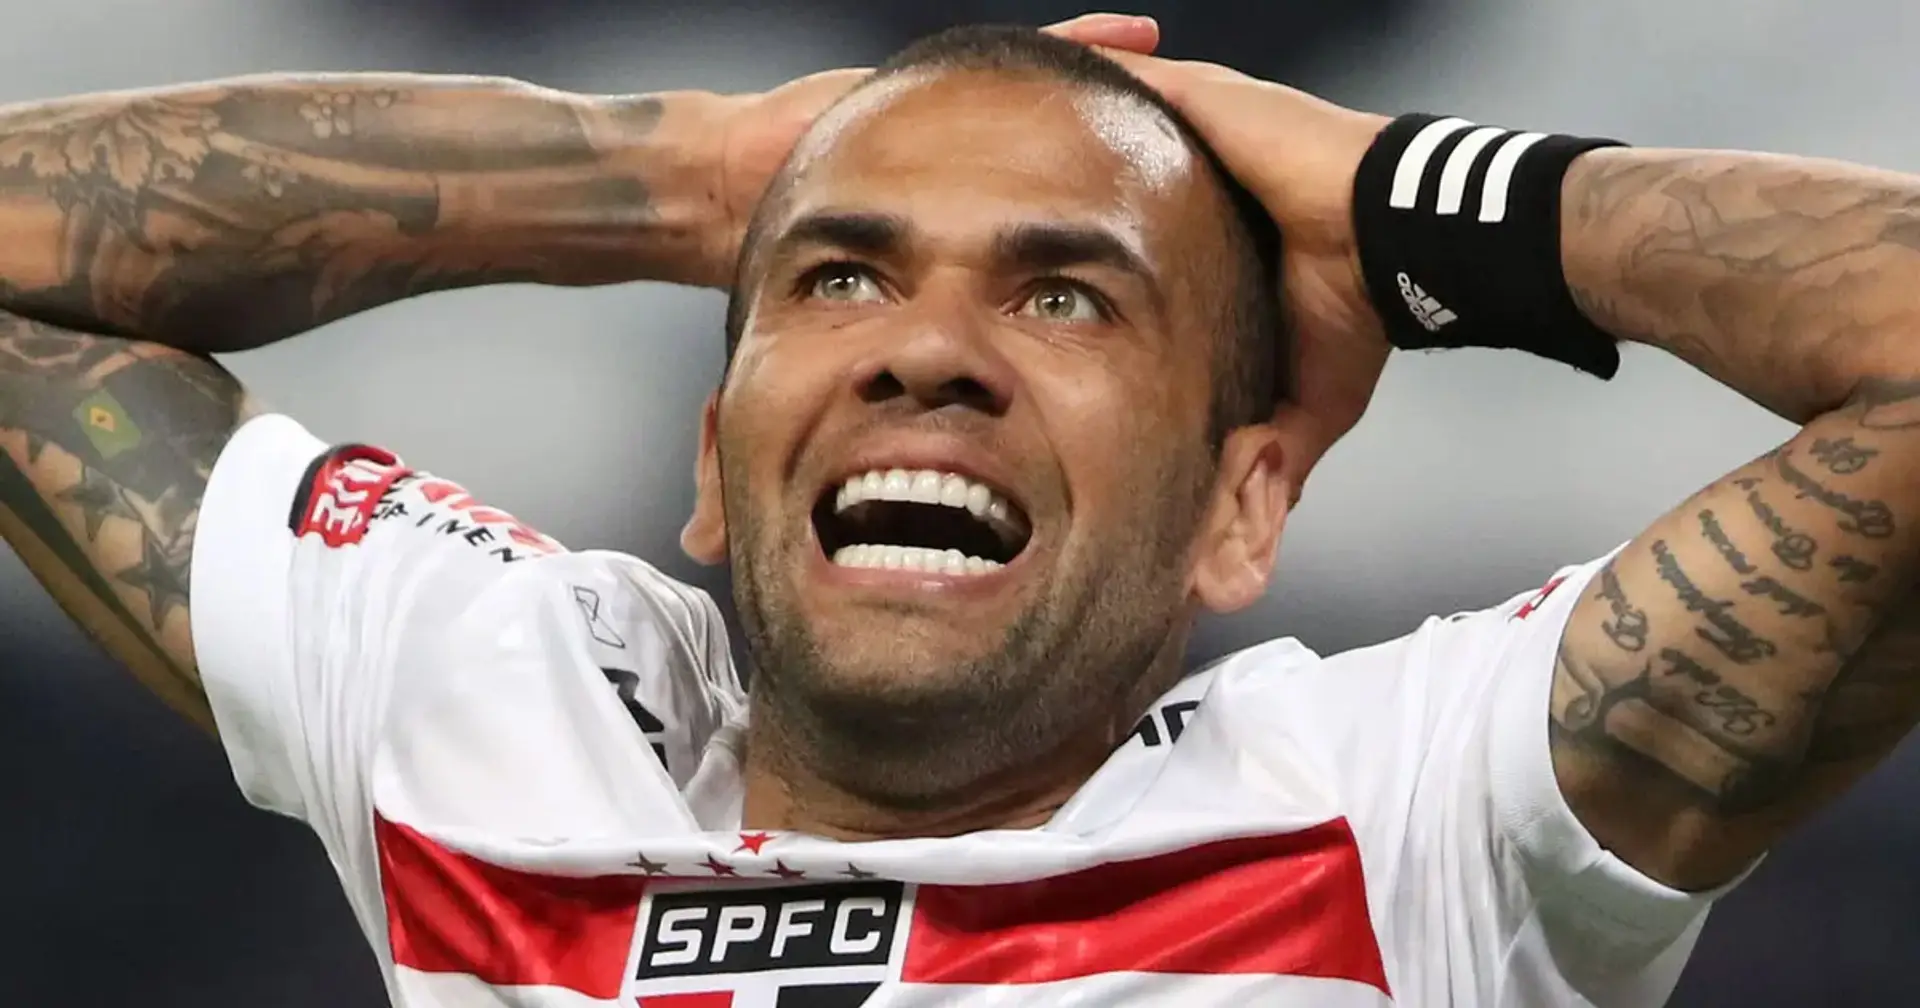 Barca will not sign Dani Alves — multiple reports